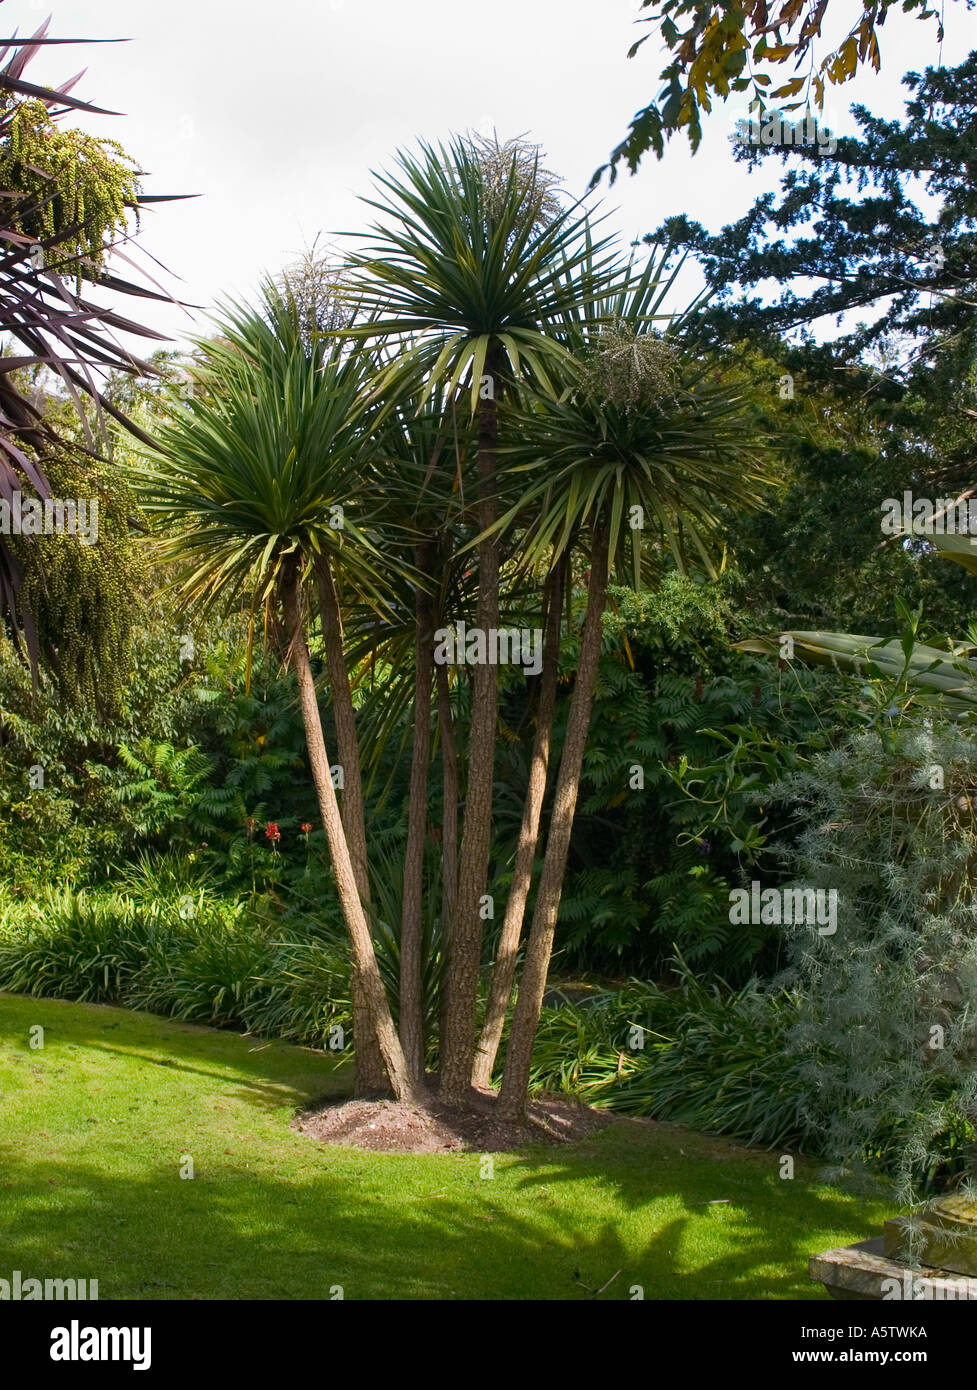 Tropical garden with palm trees Stock Photo